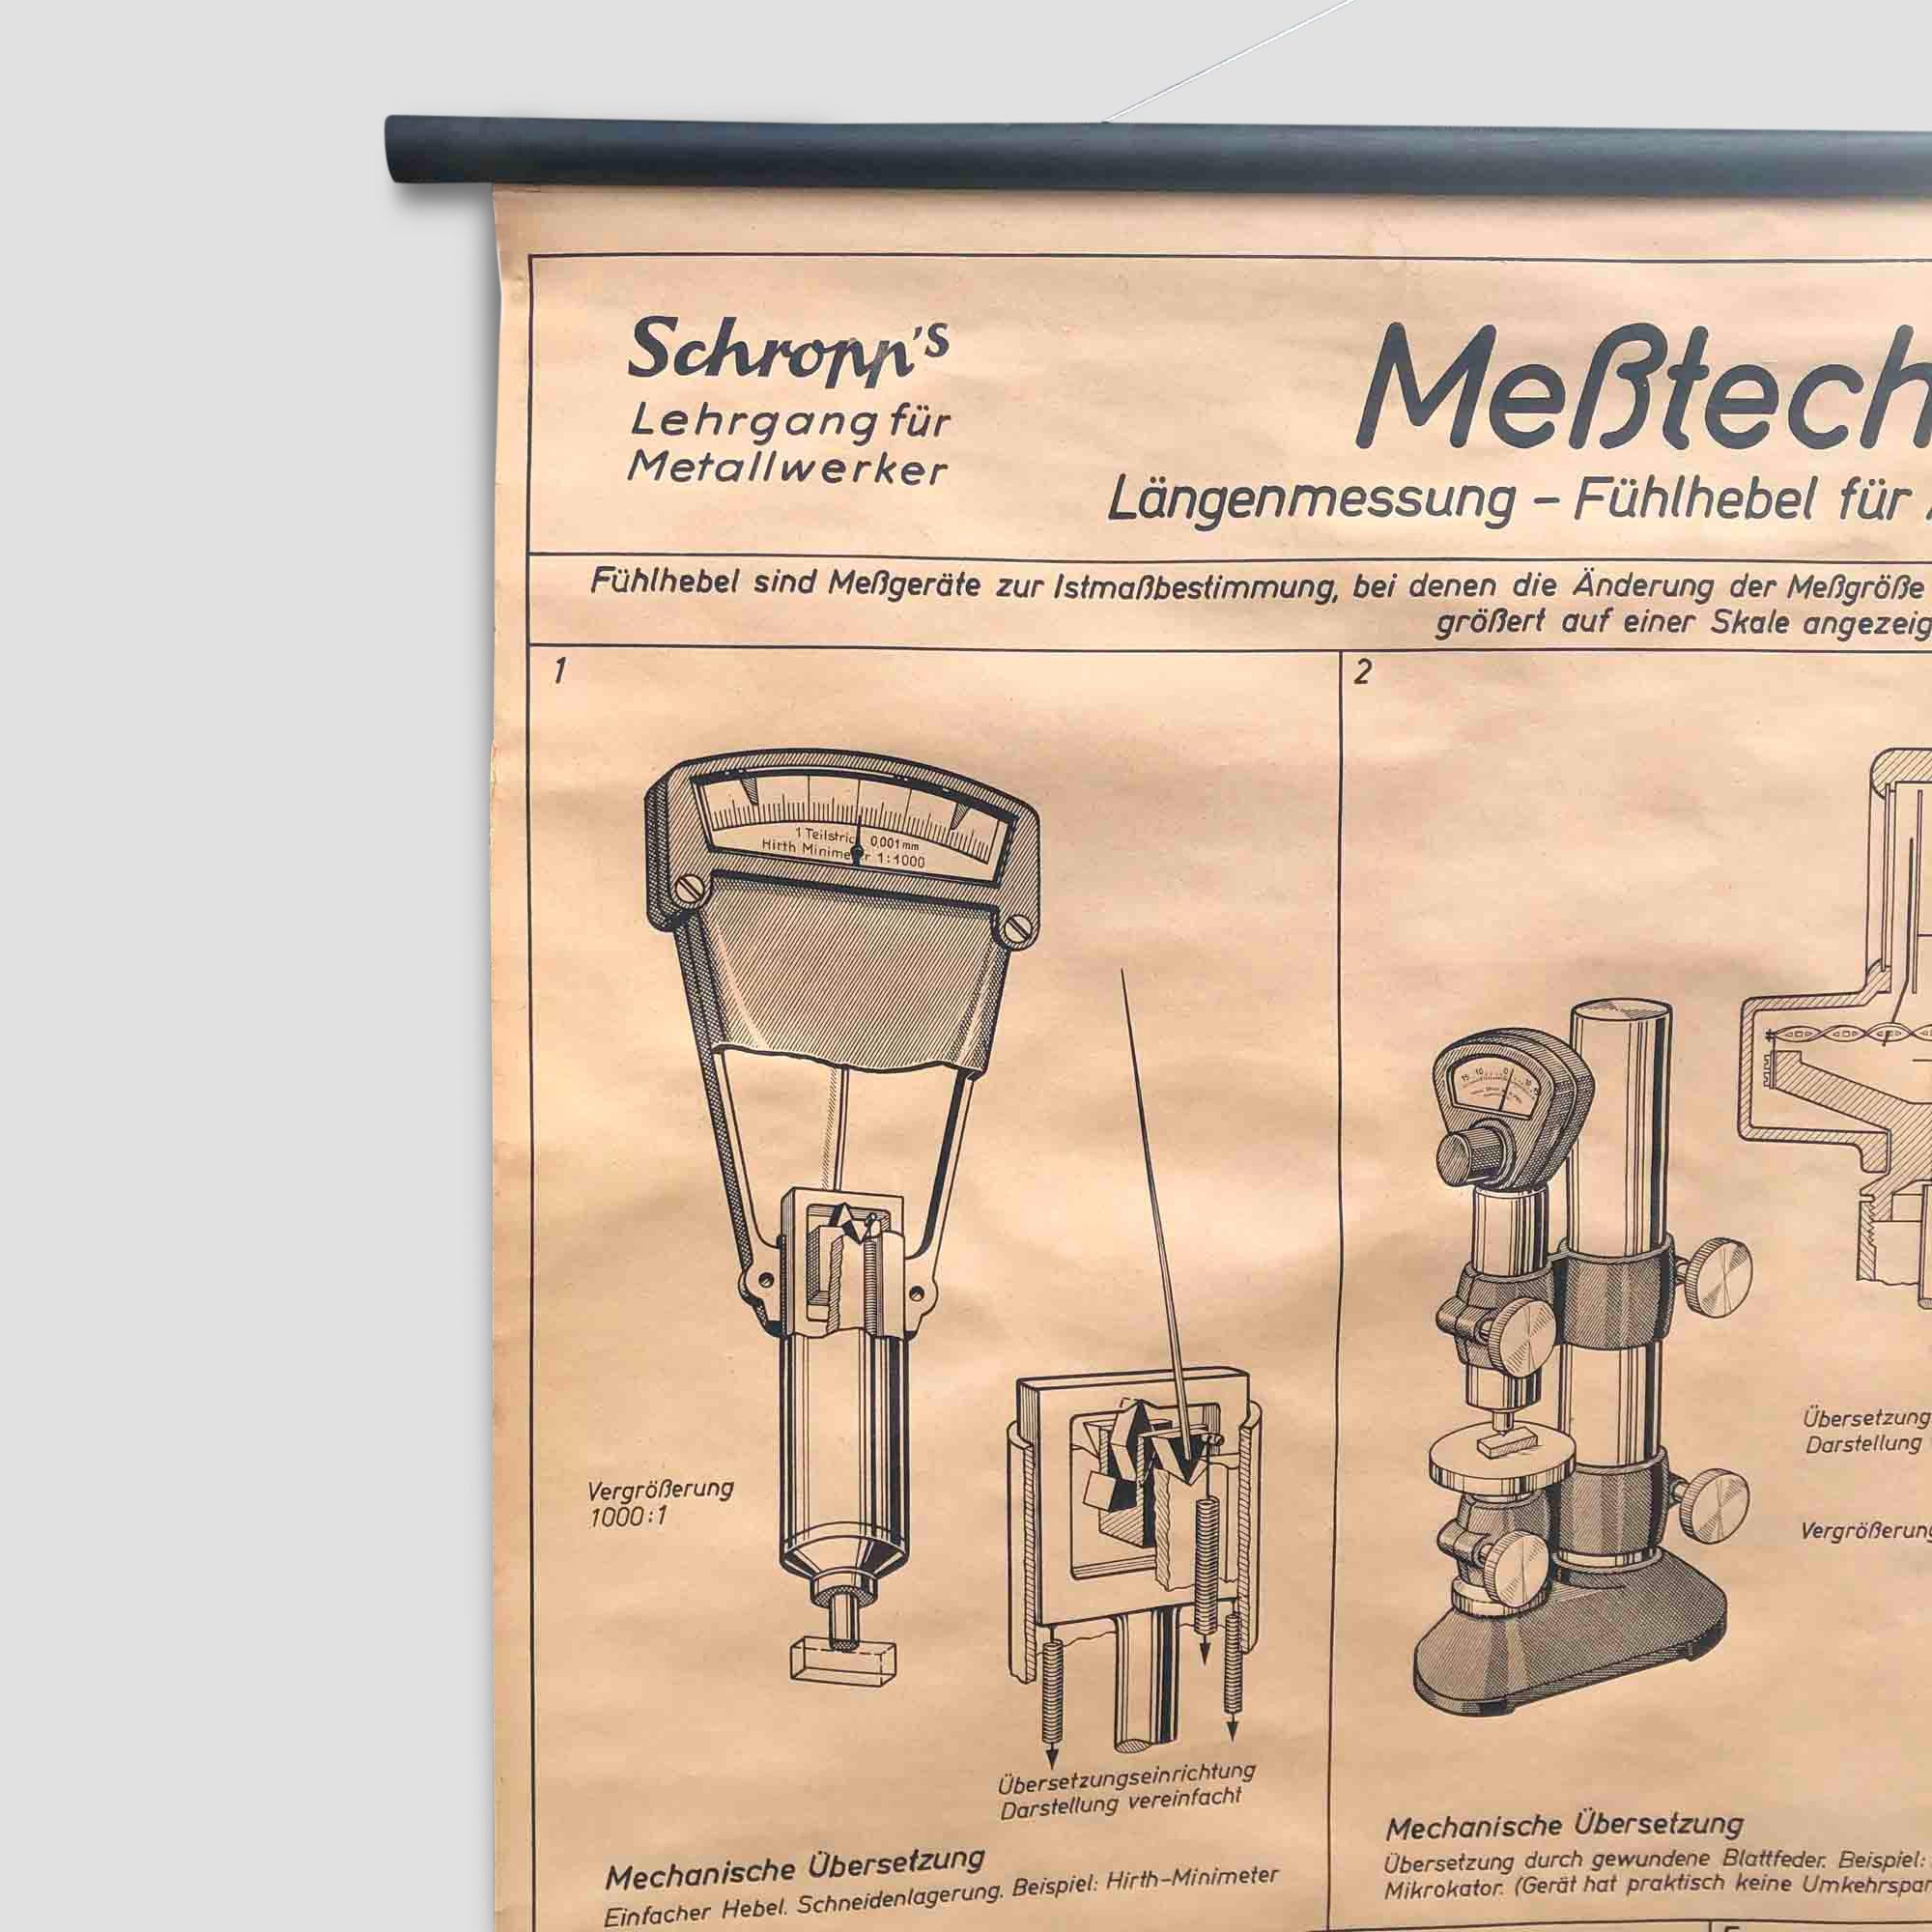 A beautiful, original German vintage wall chart about different measurement technologies. The chart shows different appliances for electrical, mechanical, or optical measurements:
This pull-down map was used in German schools for teaching purposes.